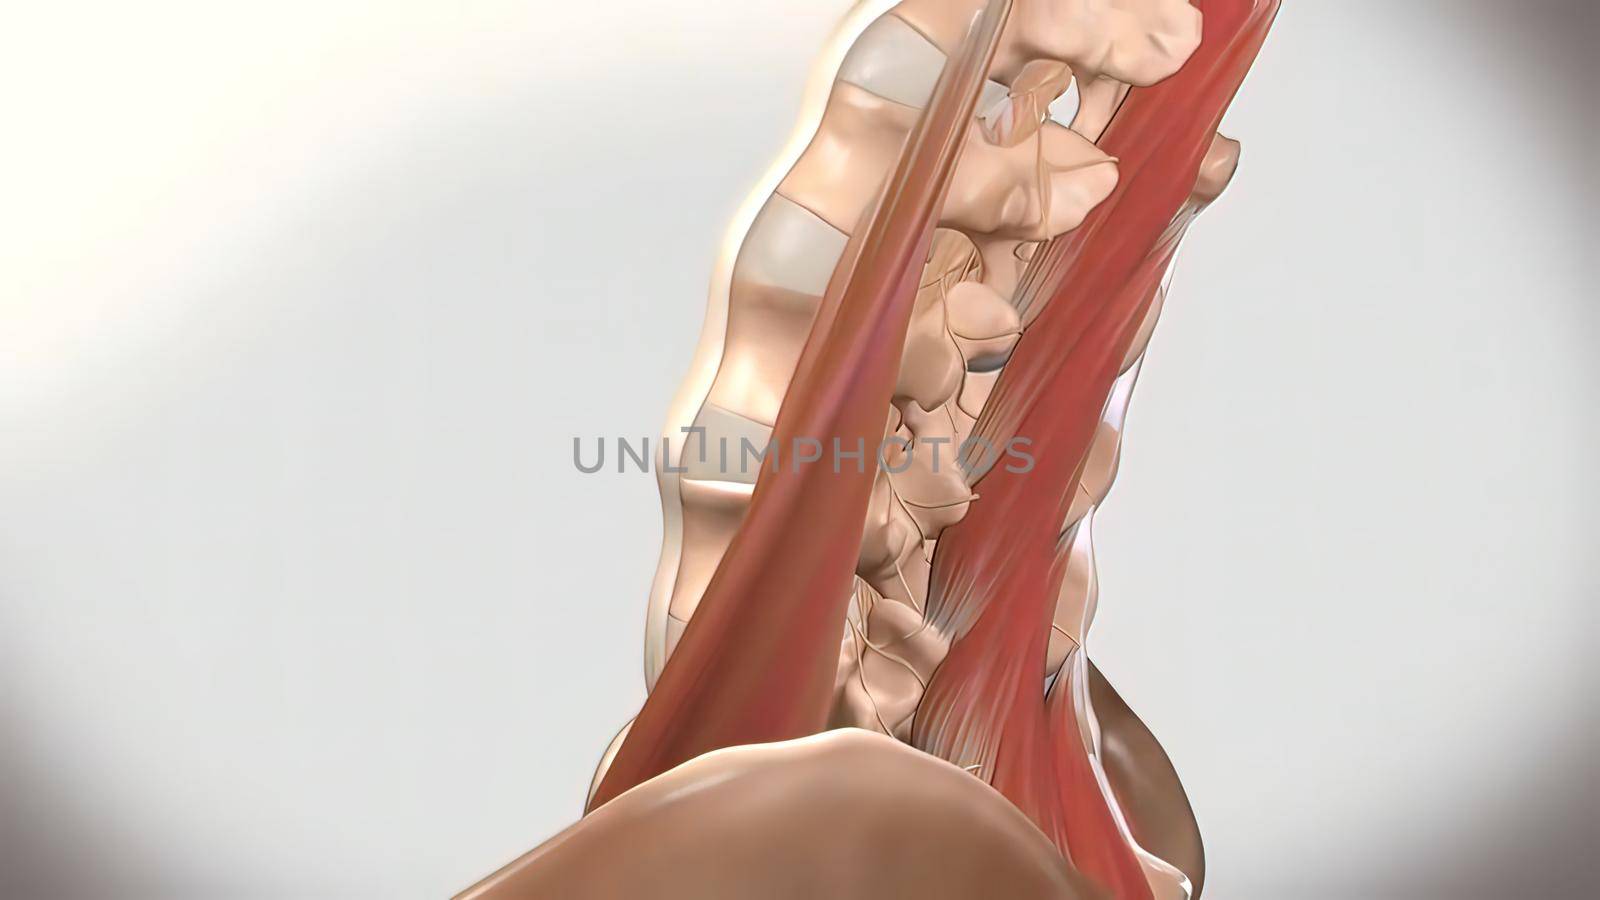 Chronic Low Back Pain. showing pain in the lower back. 3D illustration